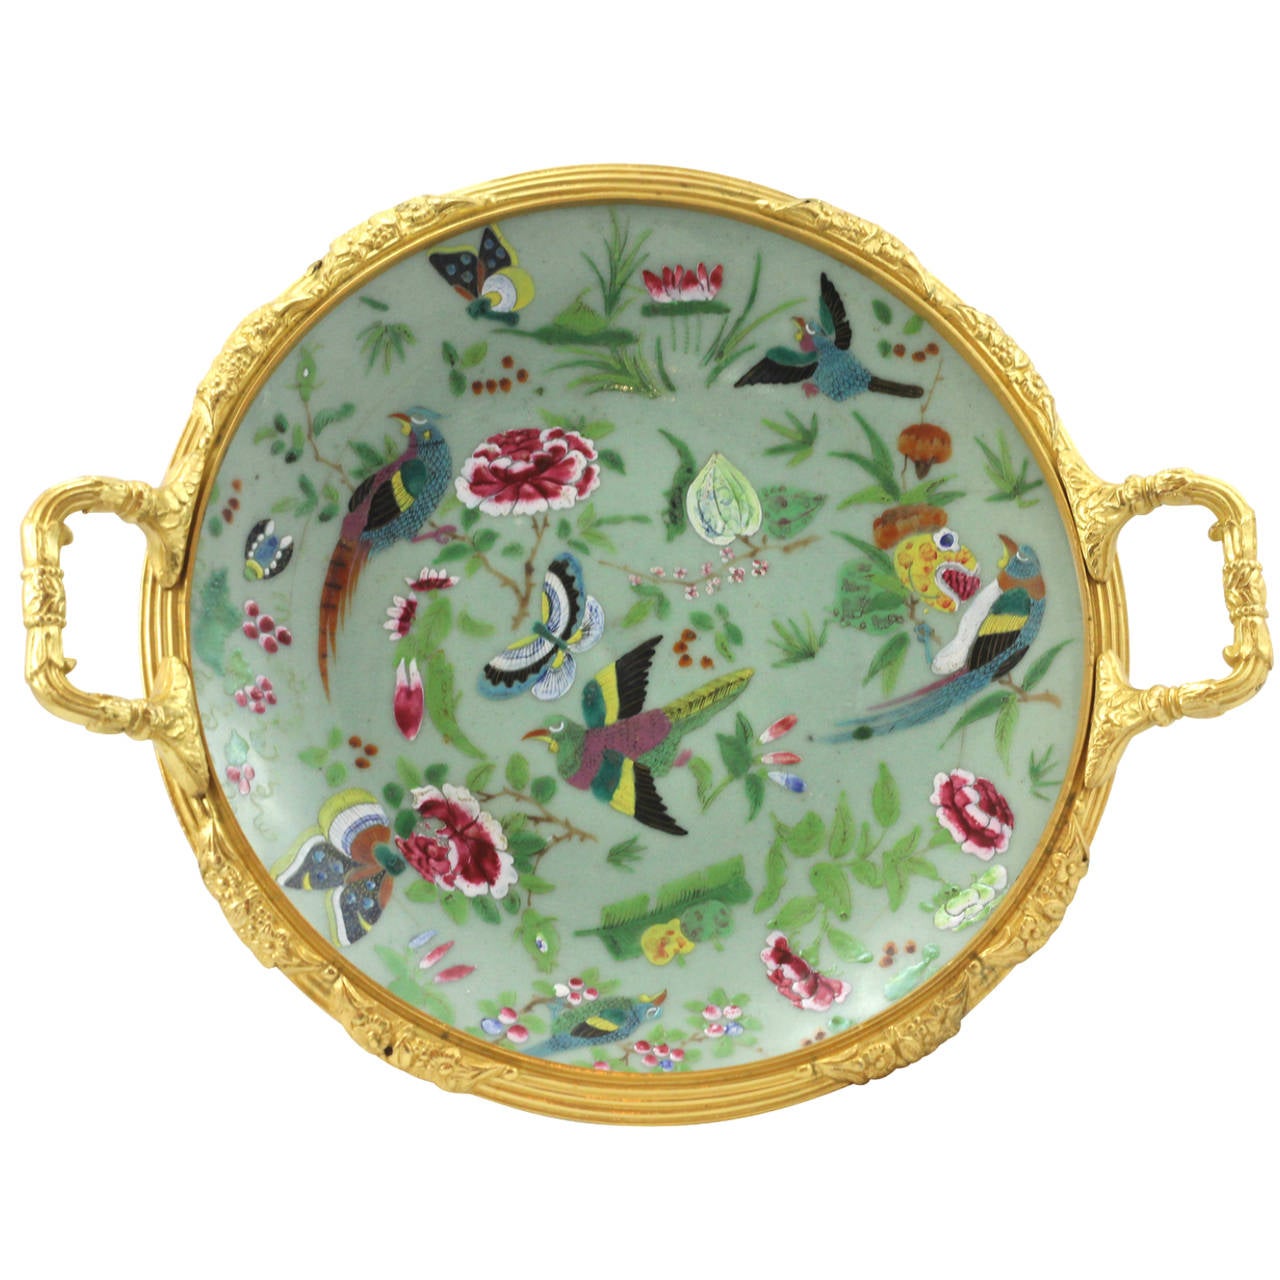 A colorful Cantonese celadon tazza with ormolu mounts. The piece is hand decorated with a painted enamel bird, butterfly, and floral motif. The ormolu itself has a distinct European influence, and was probably added after the pieces creation during